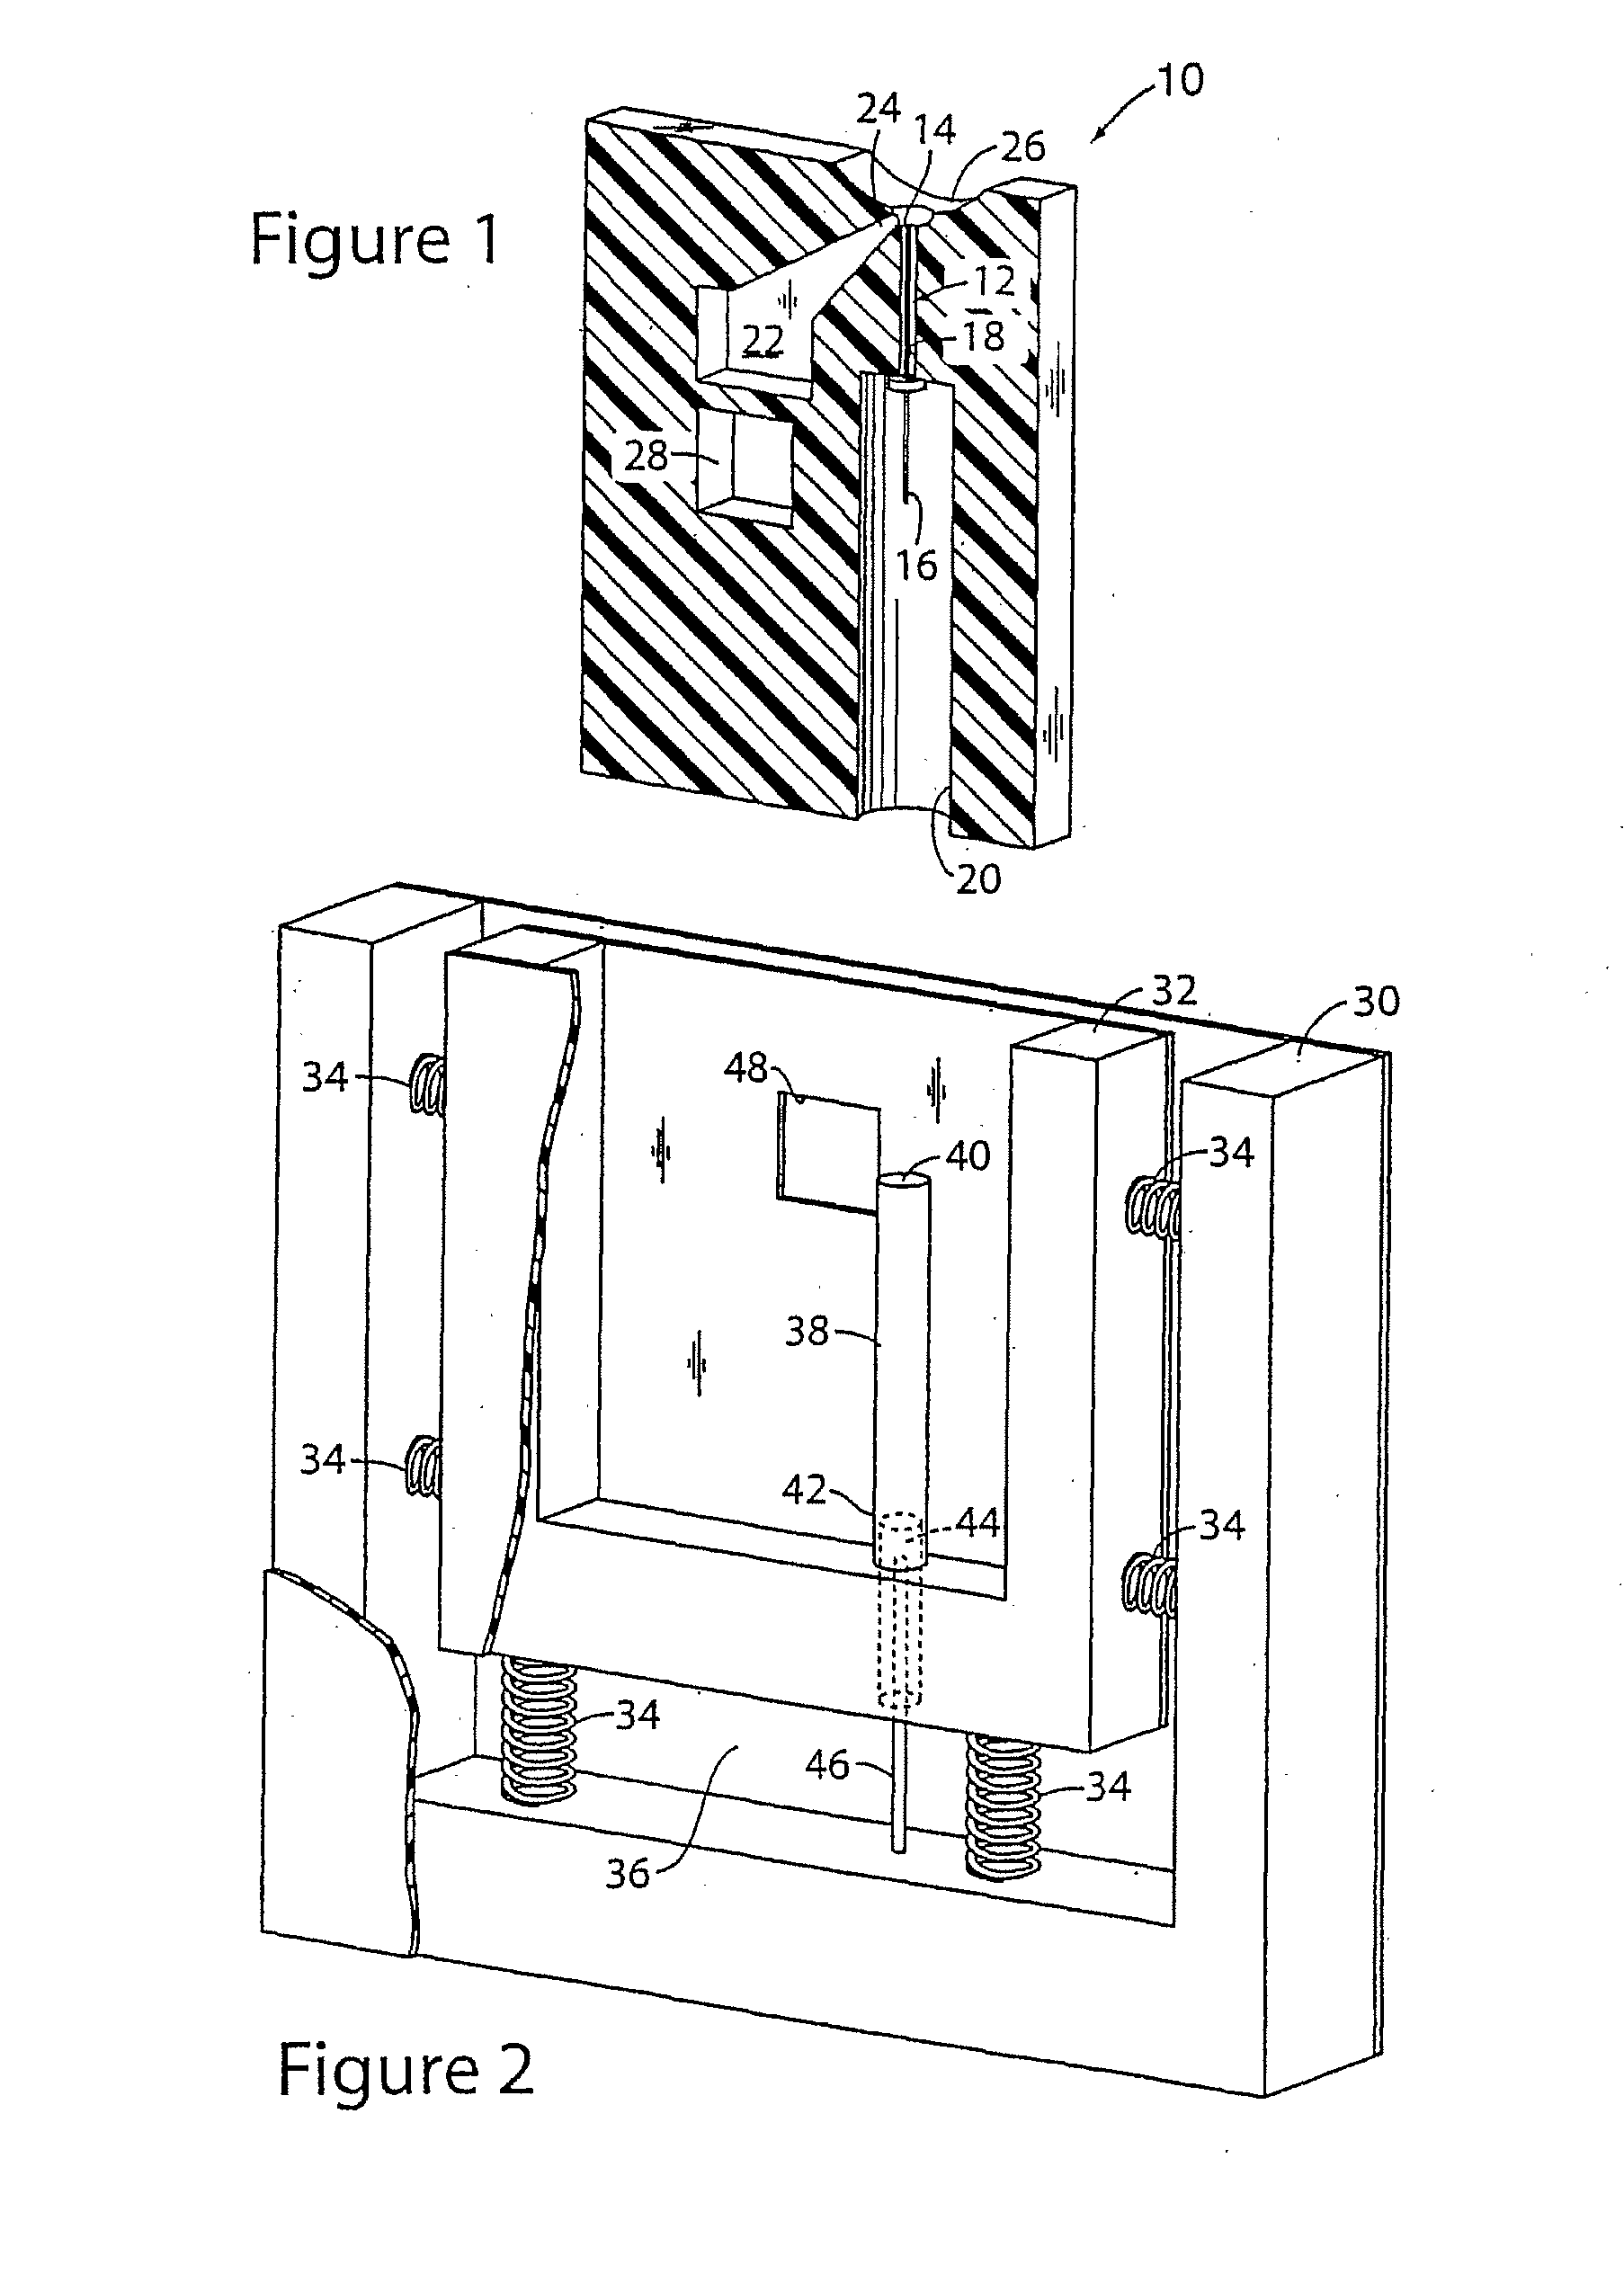 Method and apparatus for lancet launching device integrated onto a blood-sampling cartridge